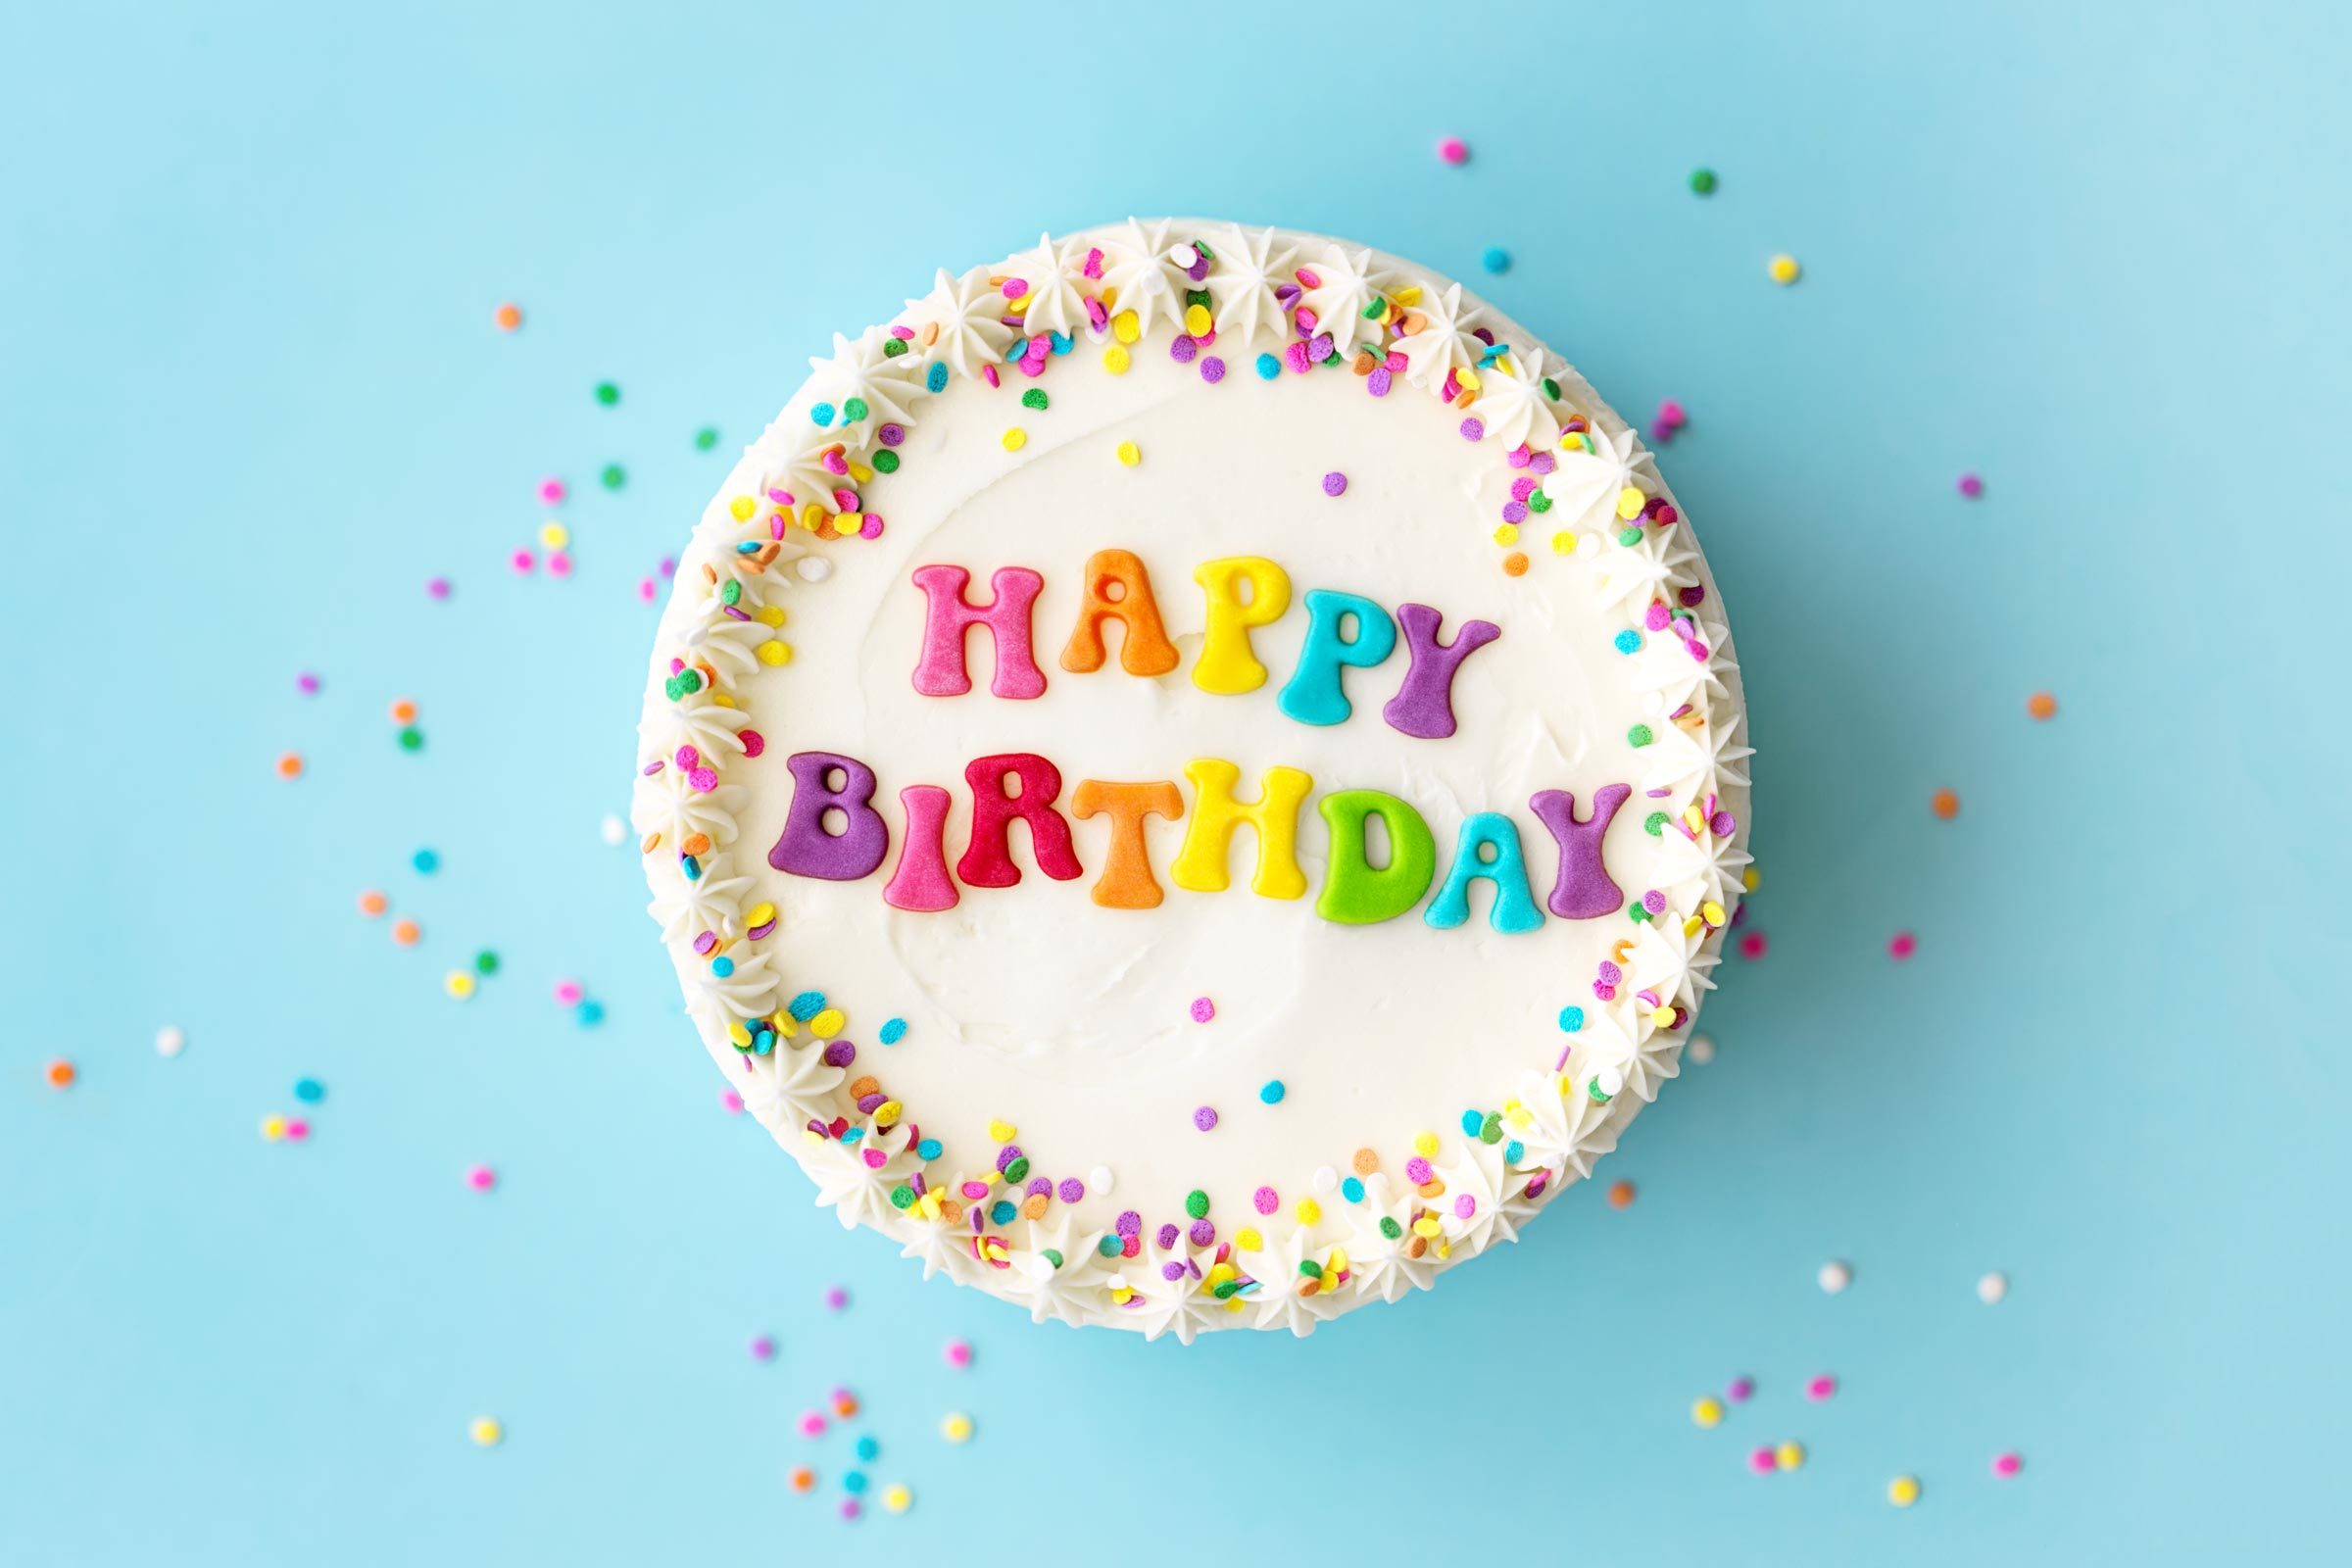 These Are the Rarest Birthdays—and the Most Common